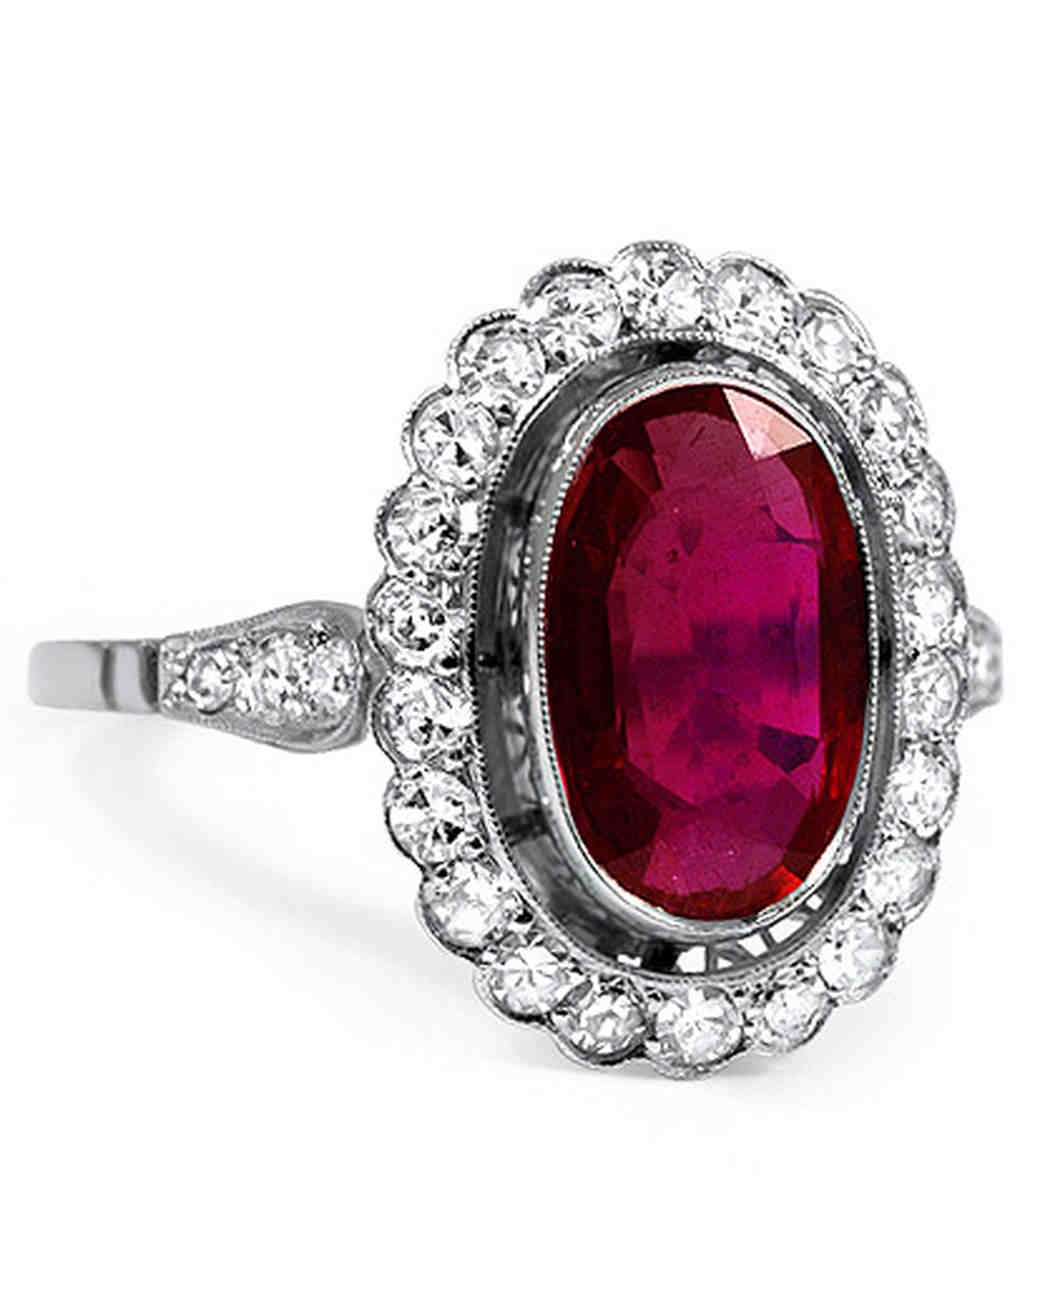 ruby engagement rings brilliant earth margalit ruby engagement ring with a round diamond halo ctsbphf